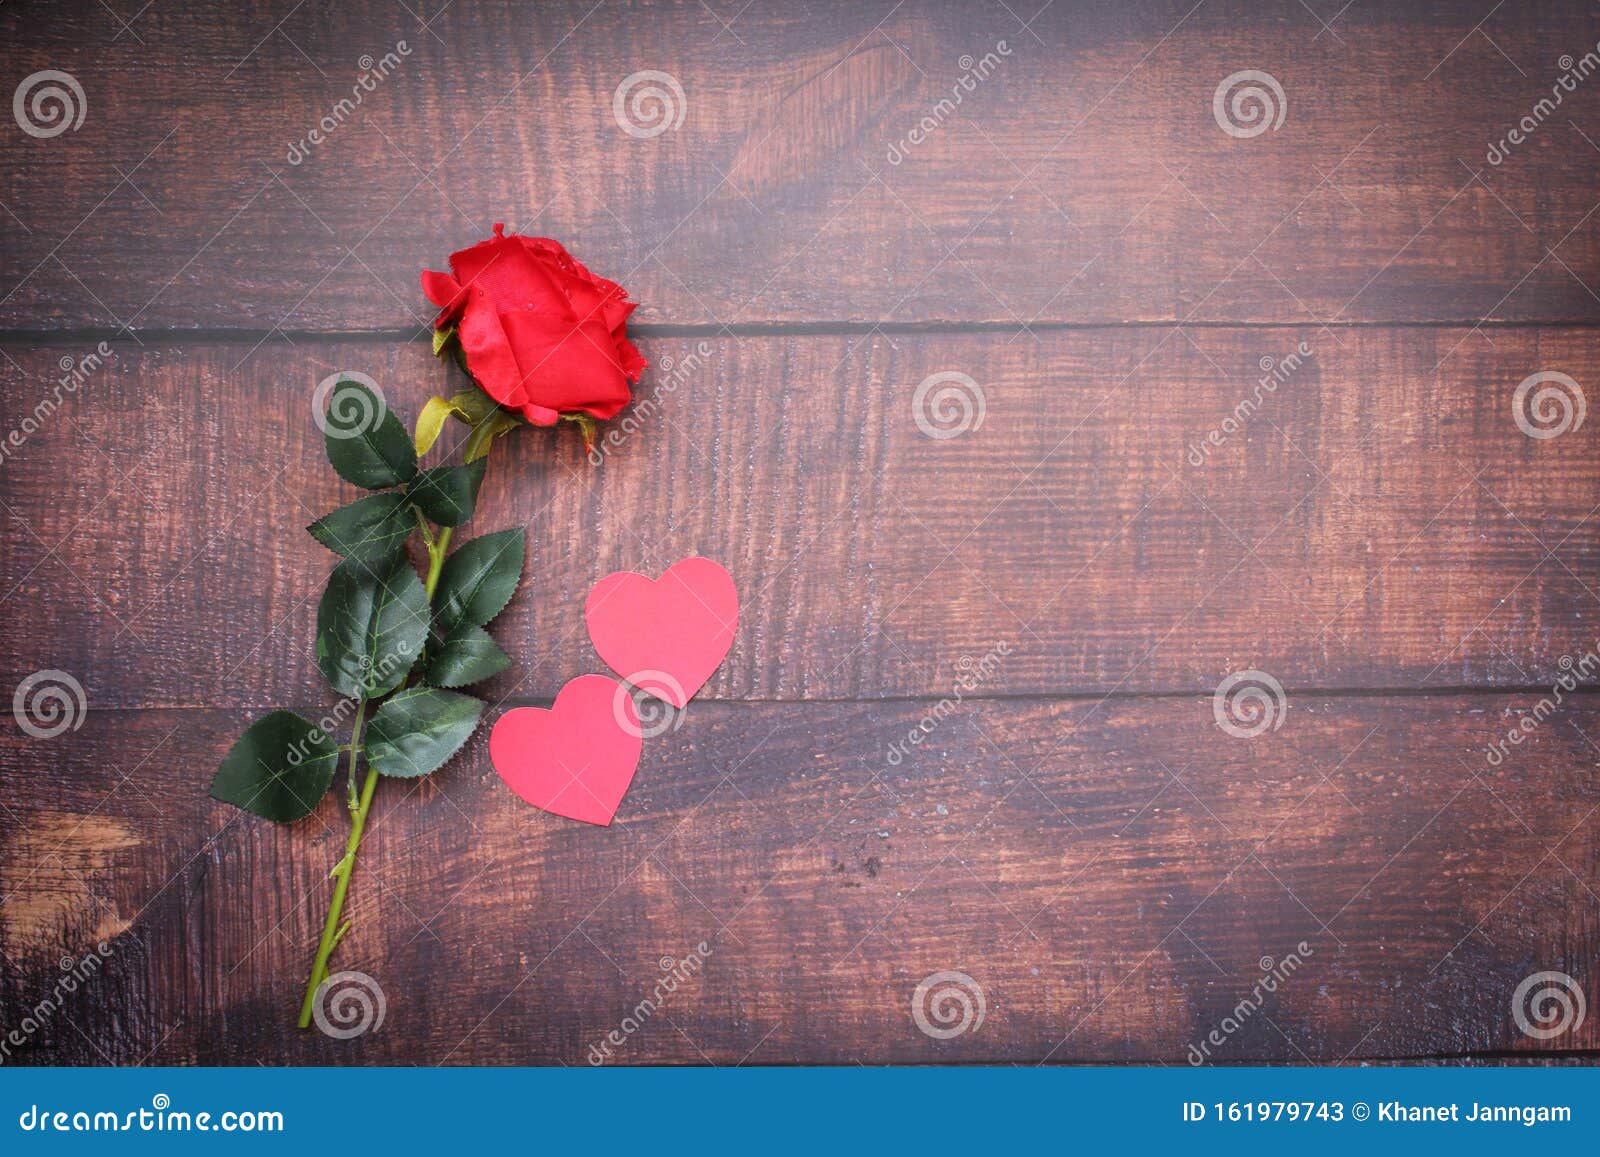 Paper Hearts and Red Roses on Wooden Floors Stock Image - Image of ...